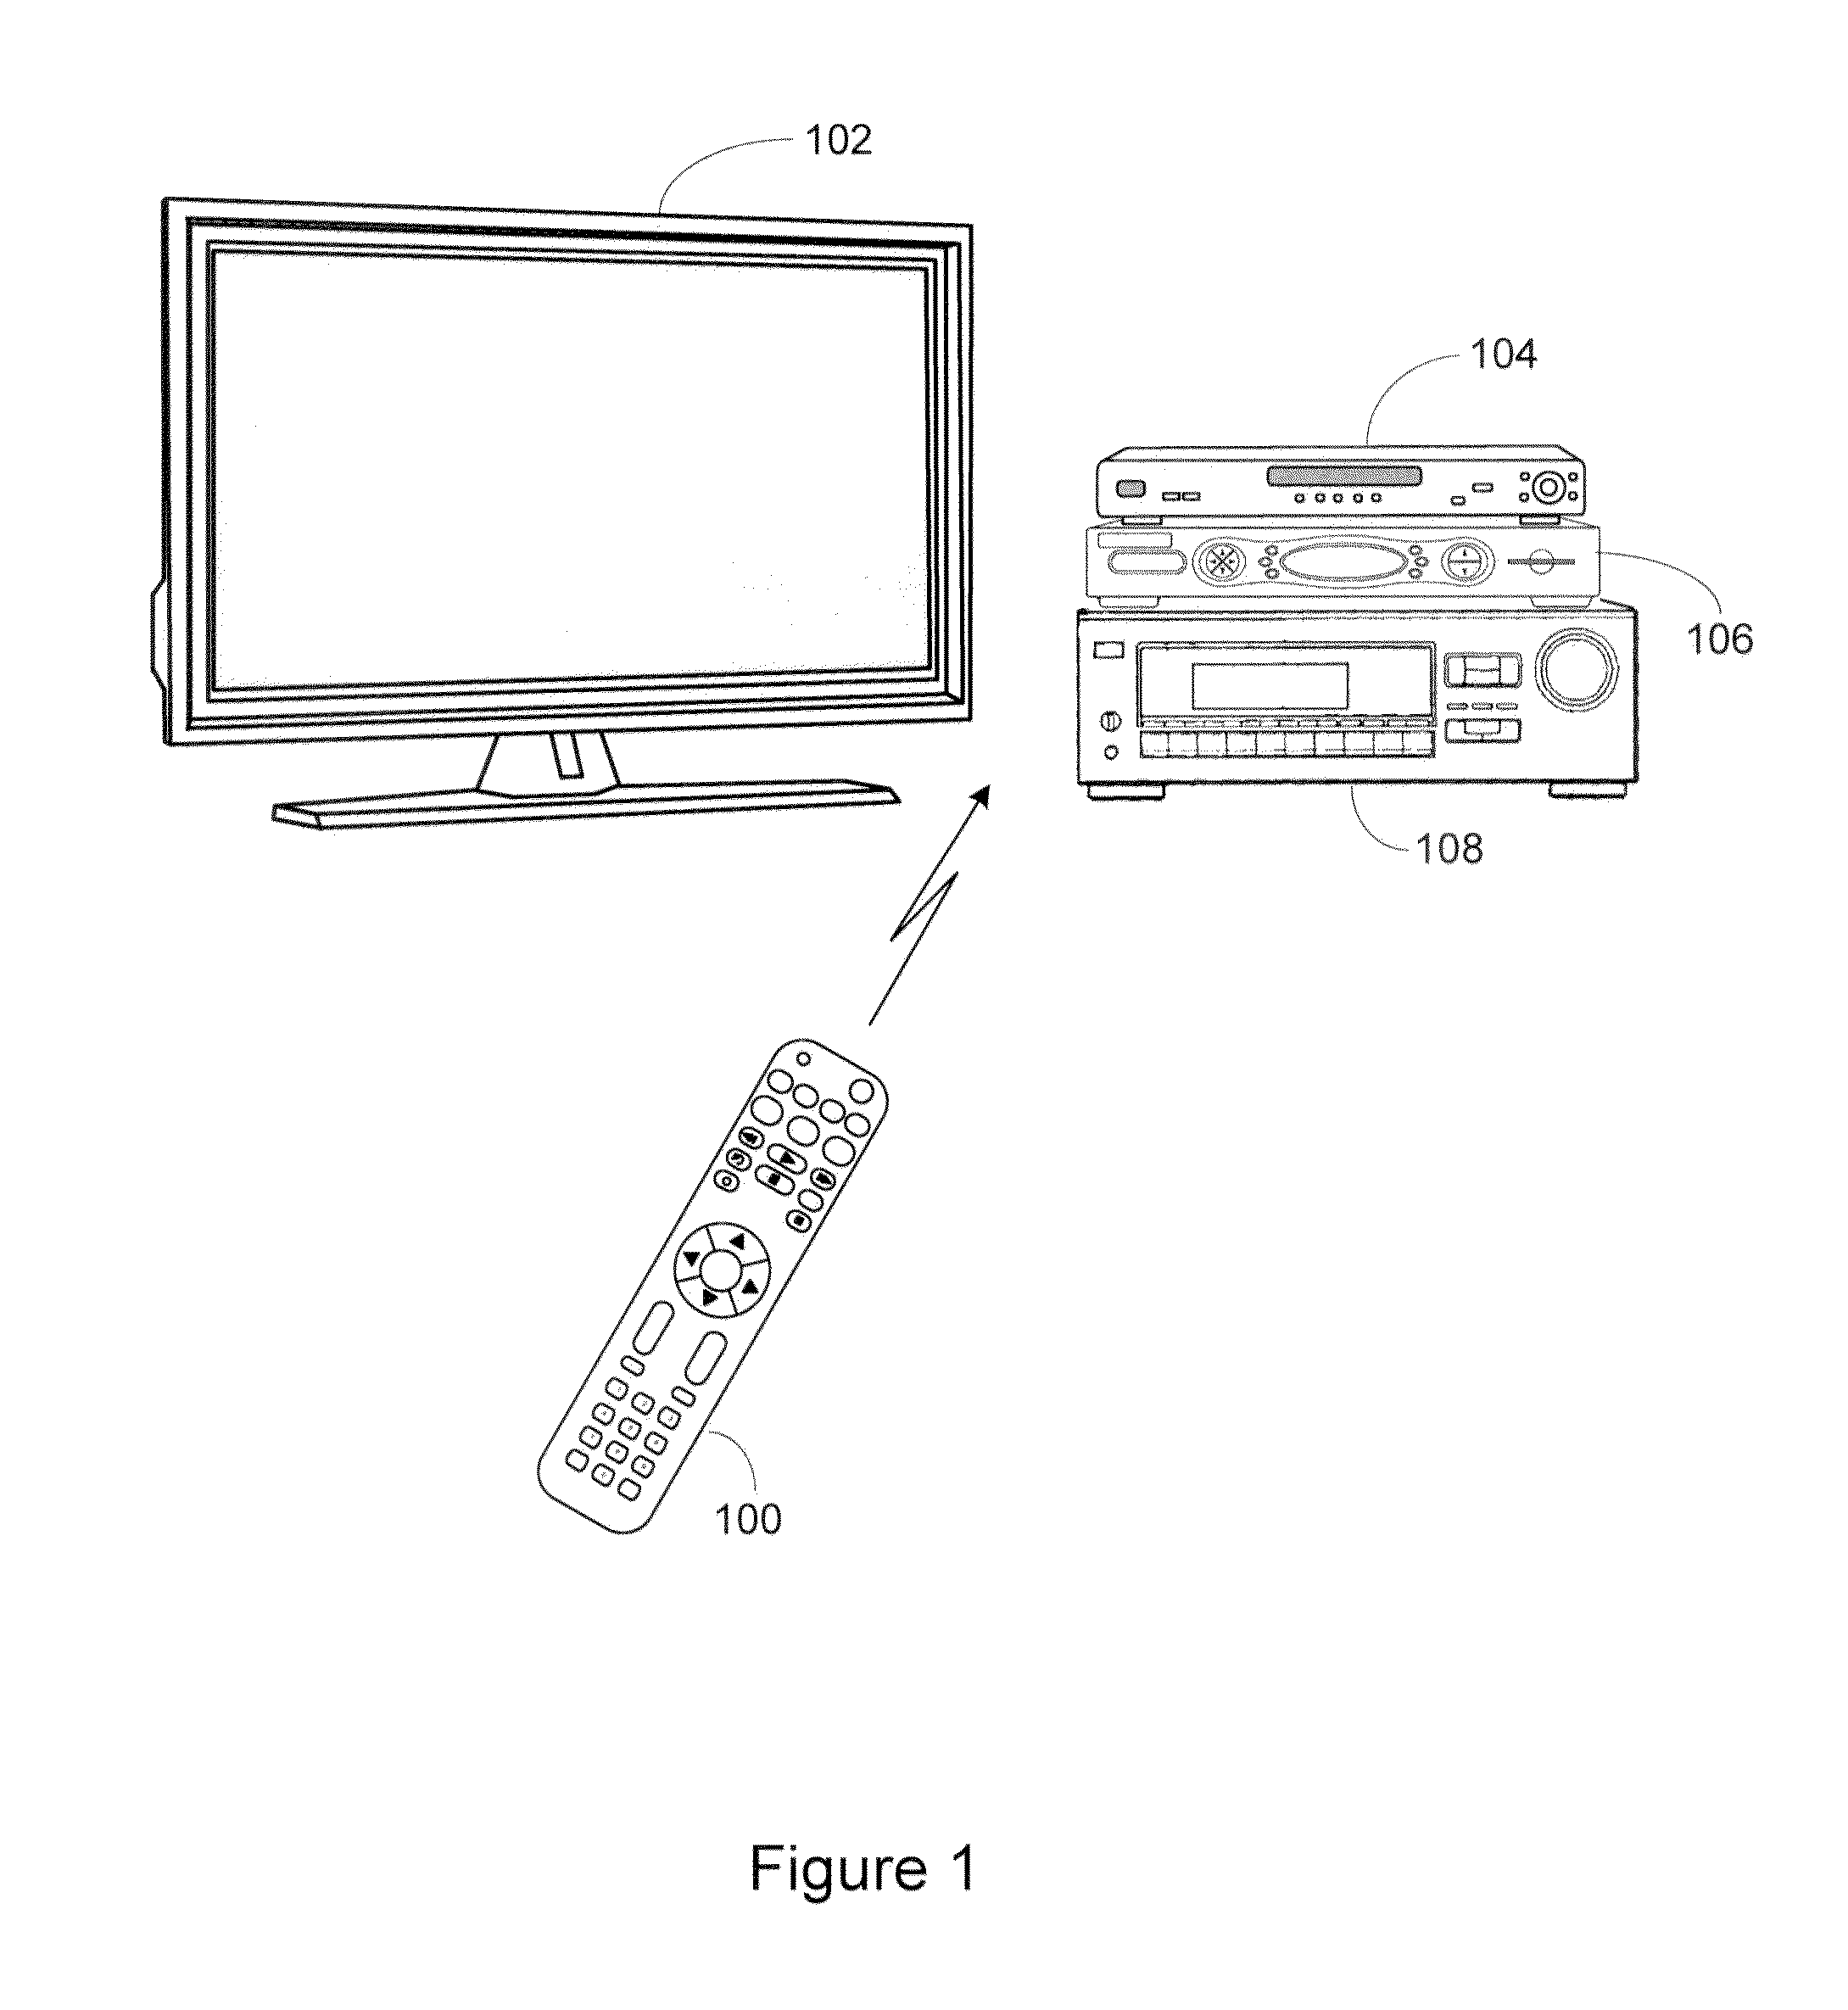 System and method for simplified activity based setup of a controlling device